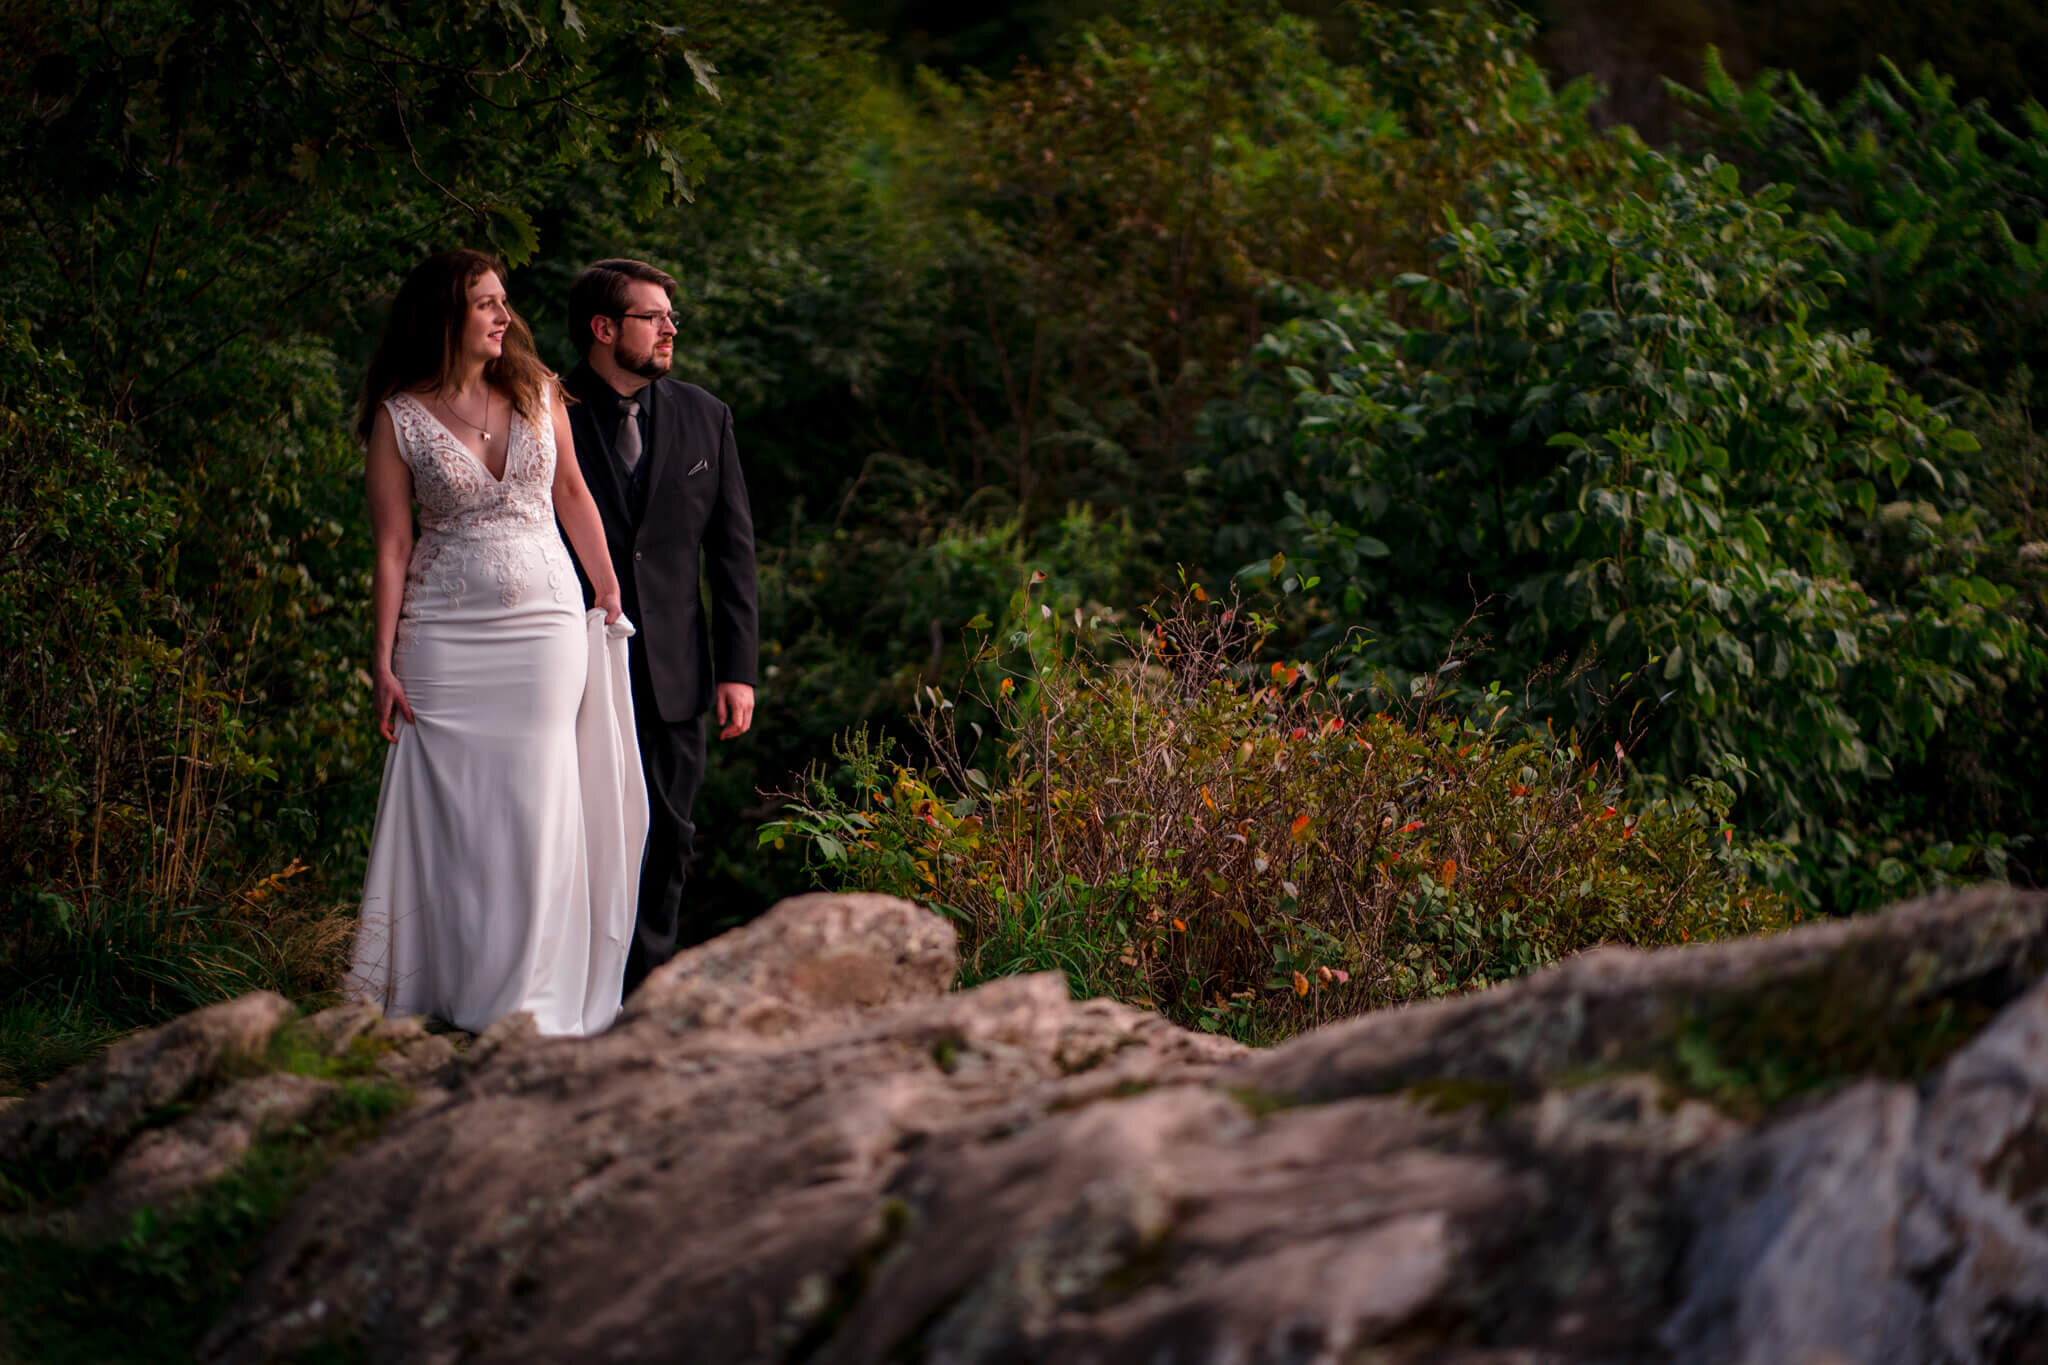 Dark-Hollow-Falls-Point-Overlook-Shenandoah-Adventure-Wedding-Portrait-Session-Photography-by-Bee-Two-Sweet-115.jpg